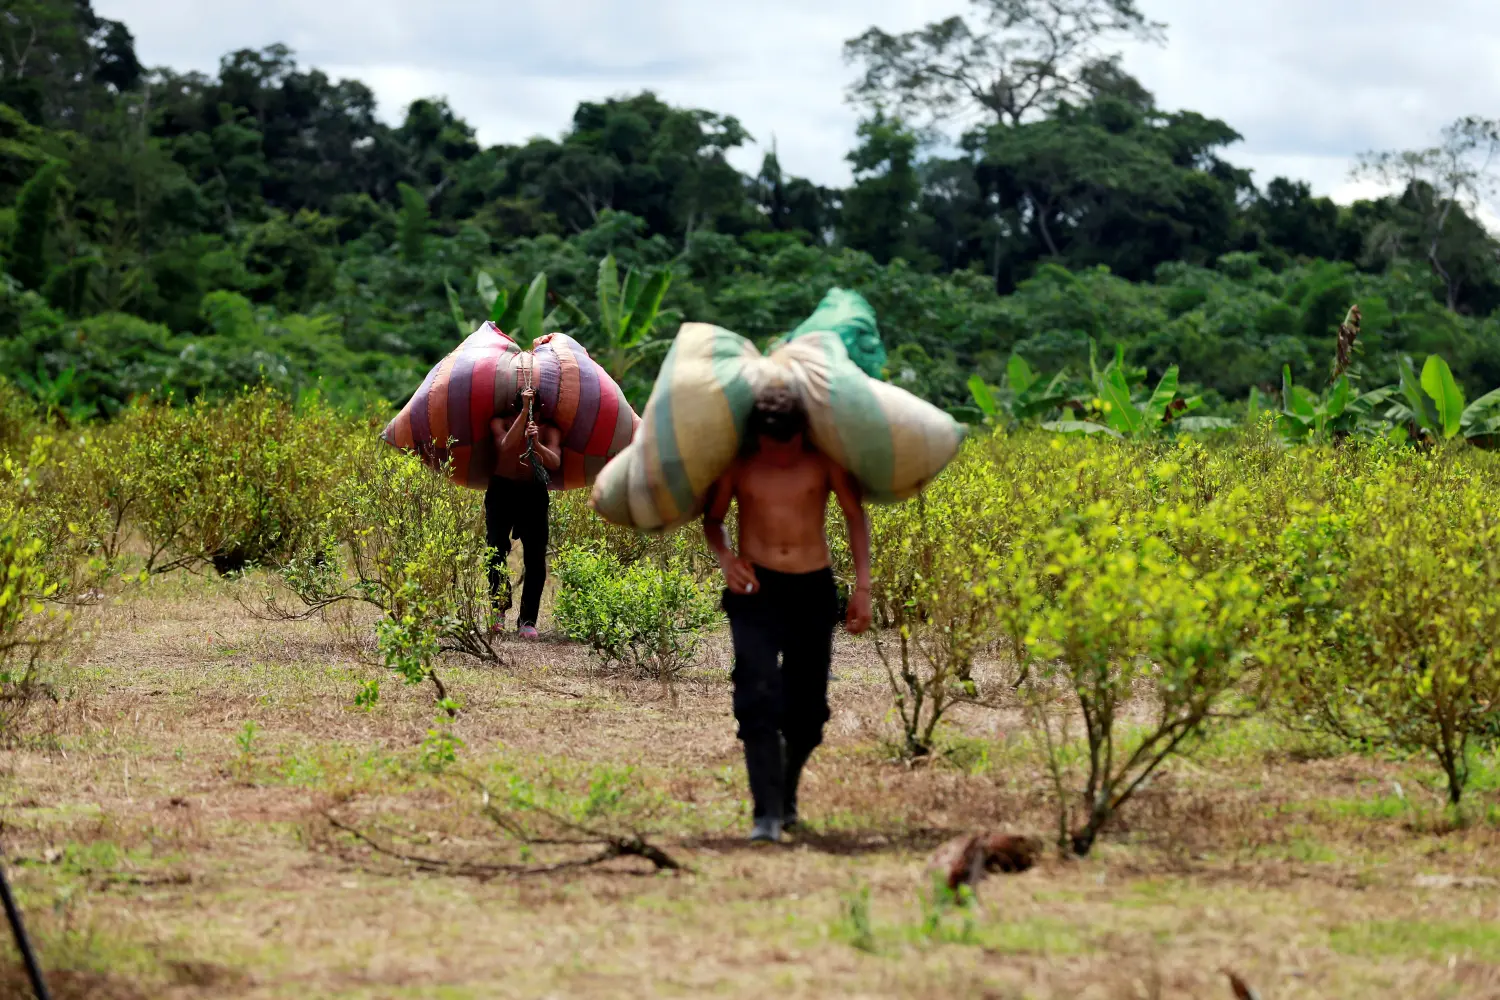 Workers who collect coca leaves, known locally as "raspachines", carry bags with harvested leaves to be processed into coca paste, on a coca farm in Guayabero, Guaviare province, Colombia, May 23, 2016. REUTERS/John Vizcaino/File Photo - RTX2N1WW